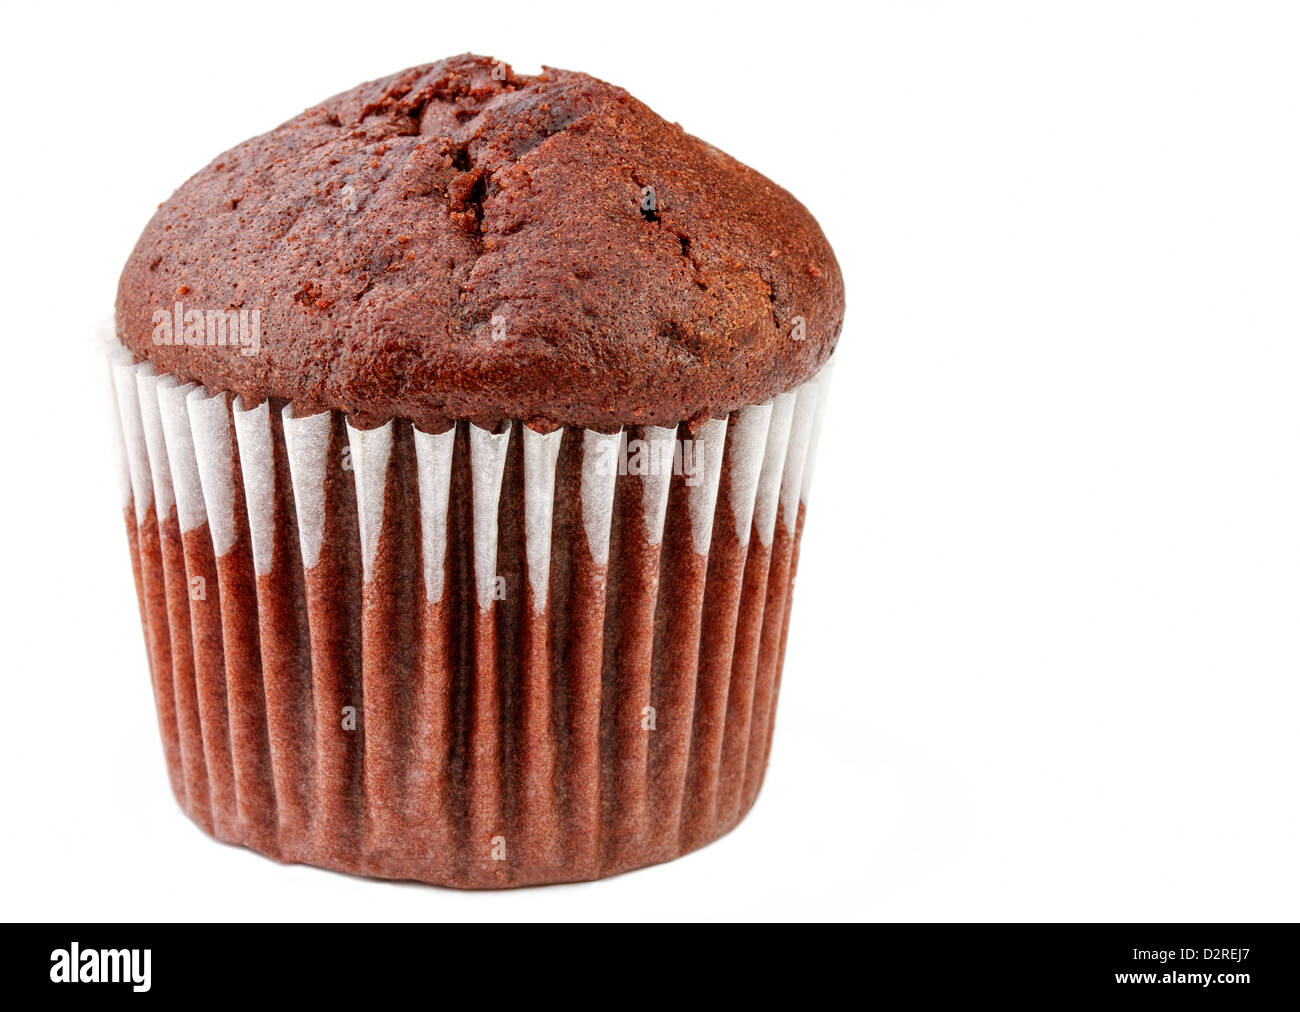 Chocolate muffin on a white background Stock Photo